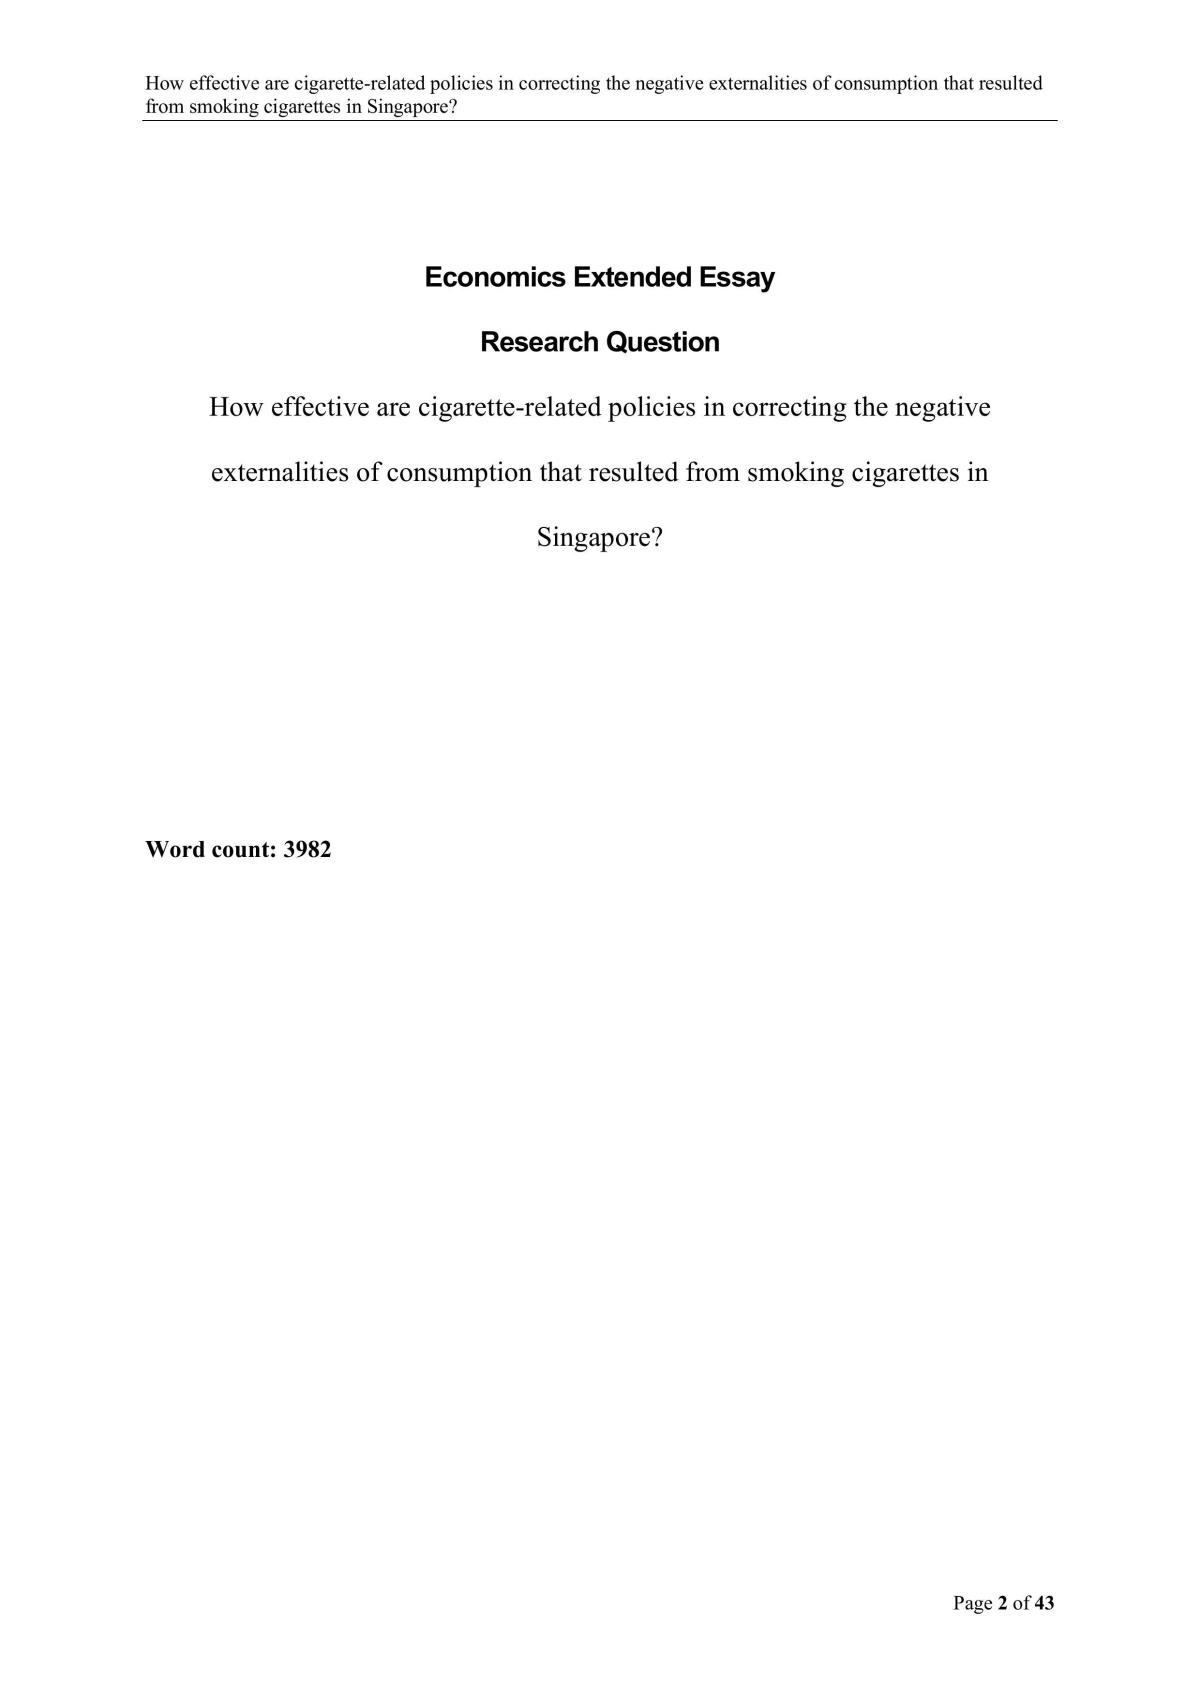 economics extended essay research questions